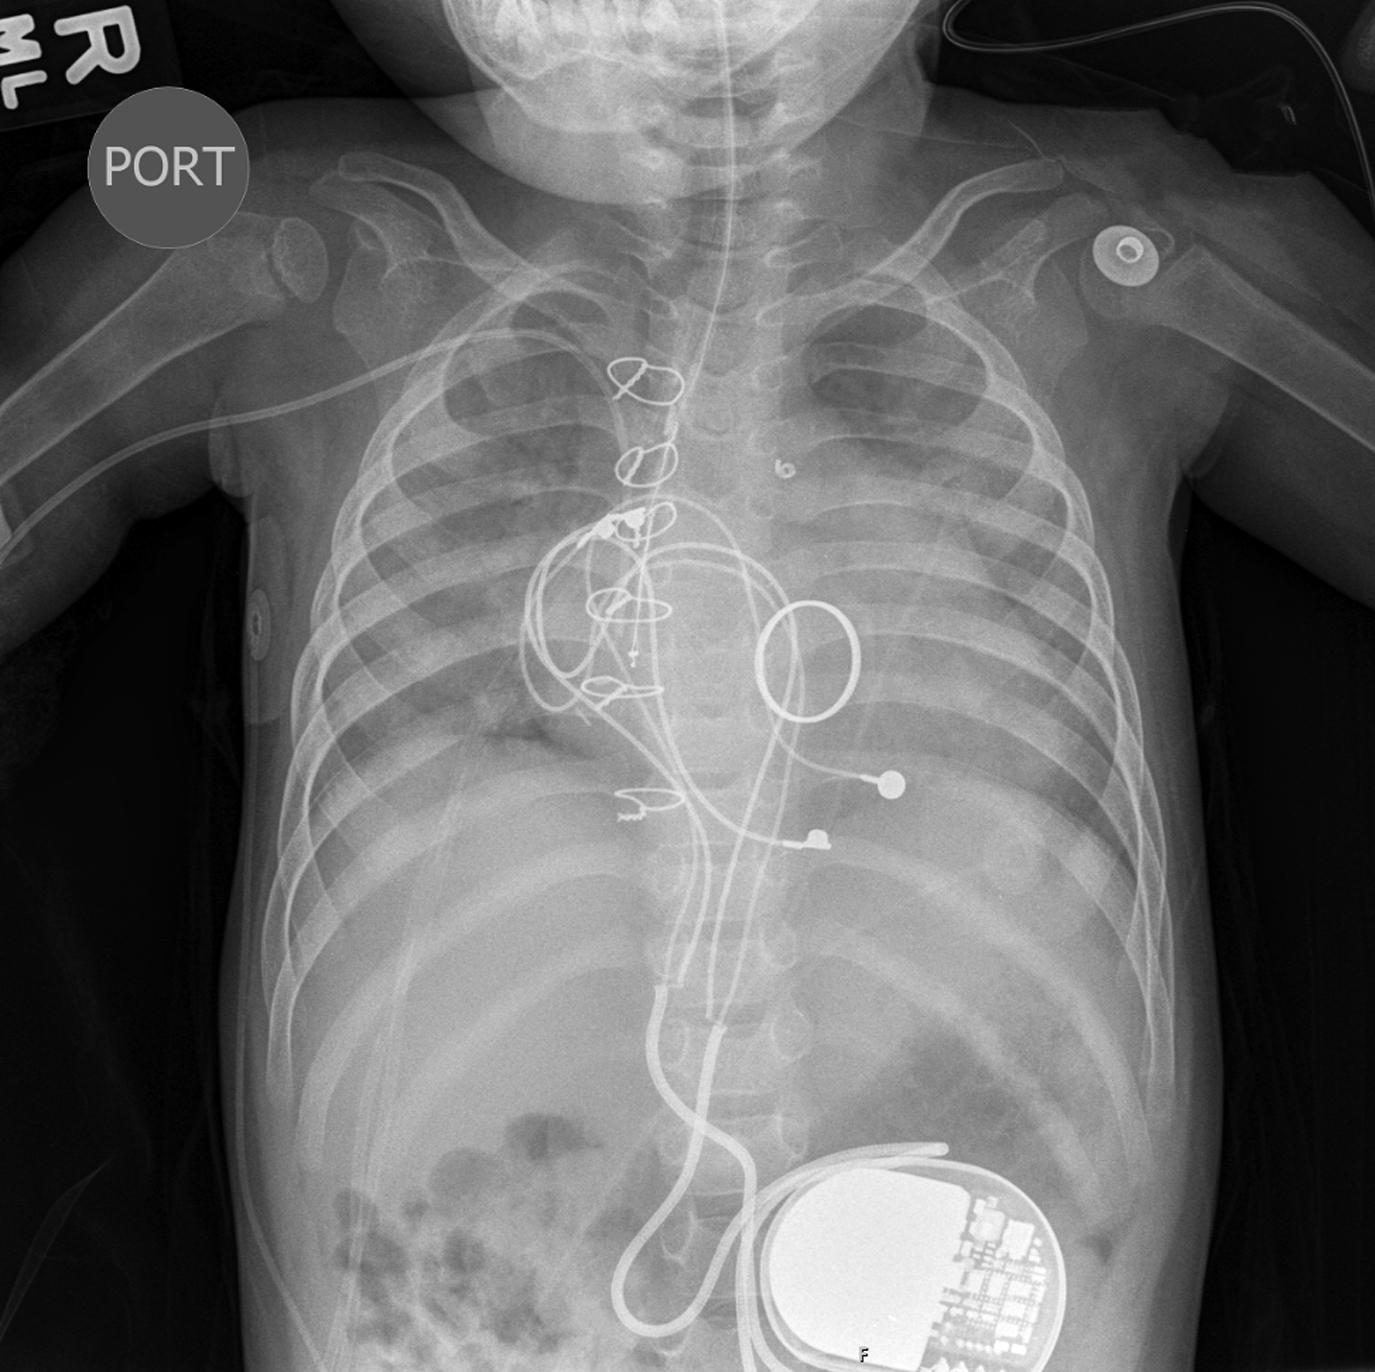 Figure 4-5, Increased pulmonary venous flow/pulmonary edema in a neonate posttricuspid valve repair and mitral valve replacement. Note the prominent but indistinct pulmonary vascularity.